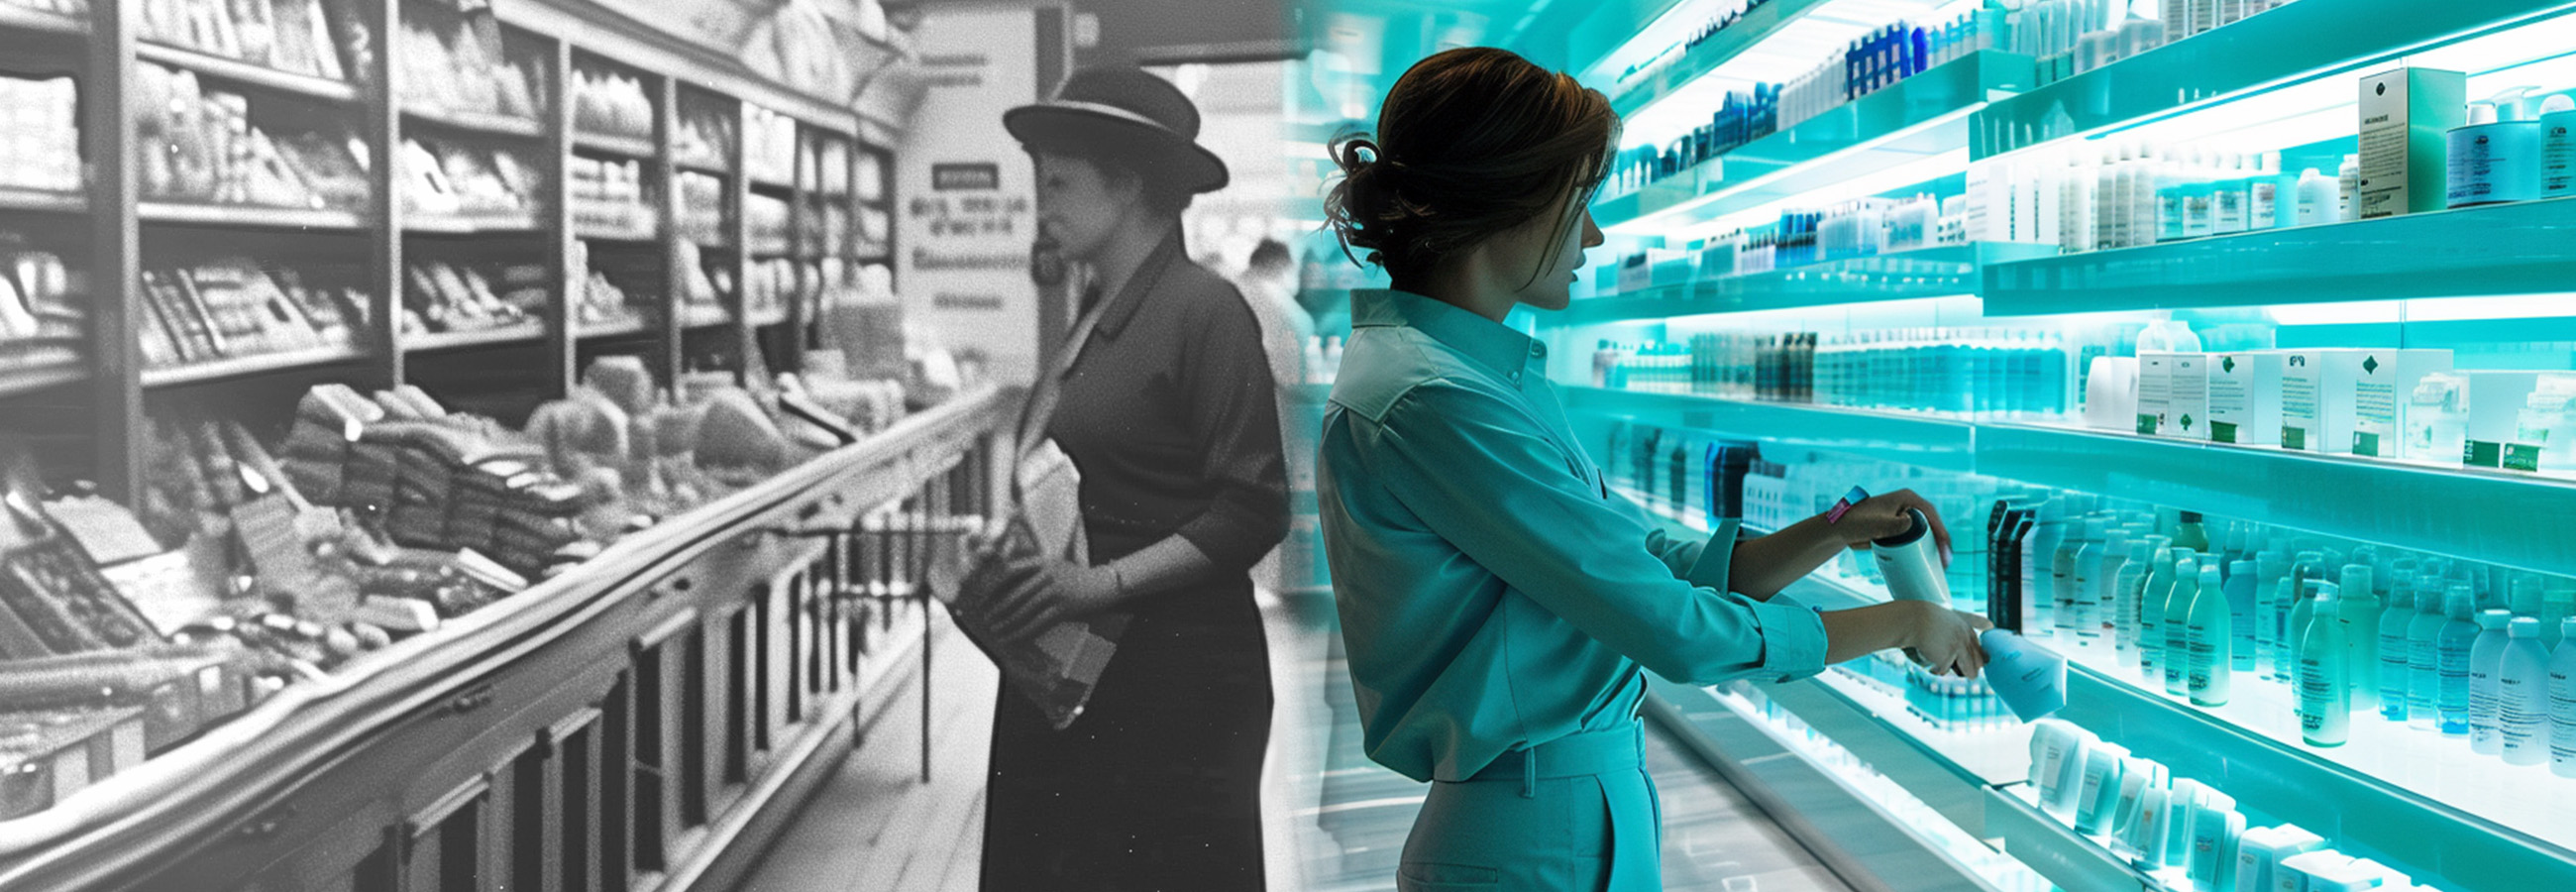 Technological breakthrough in FMCG over the last 150 years: retail innovation history